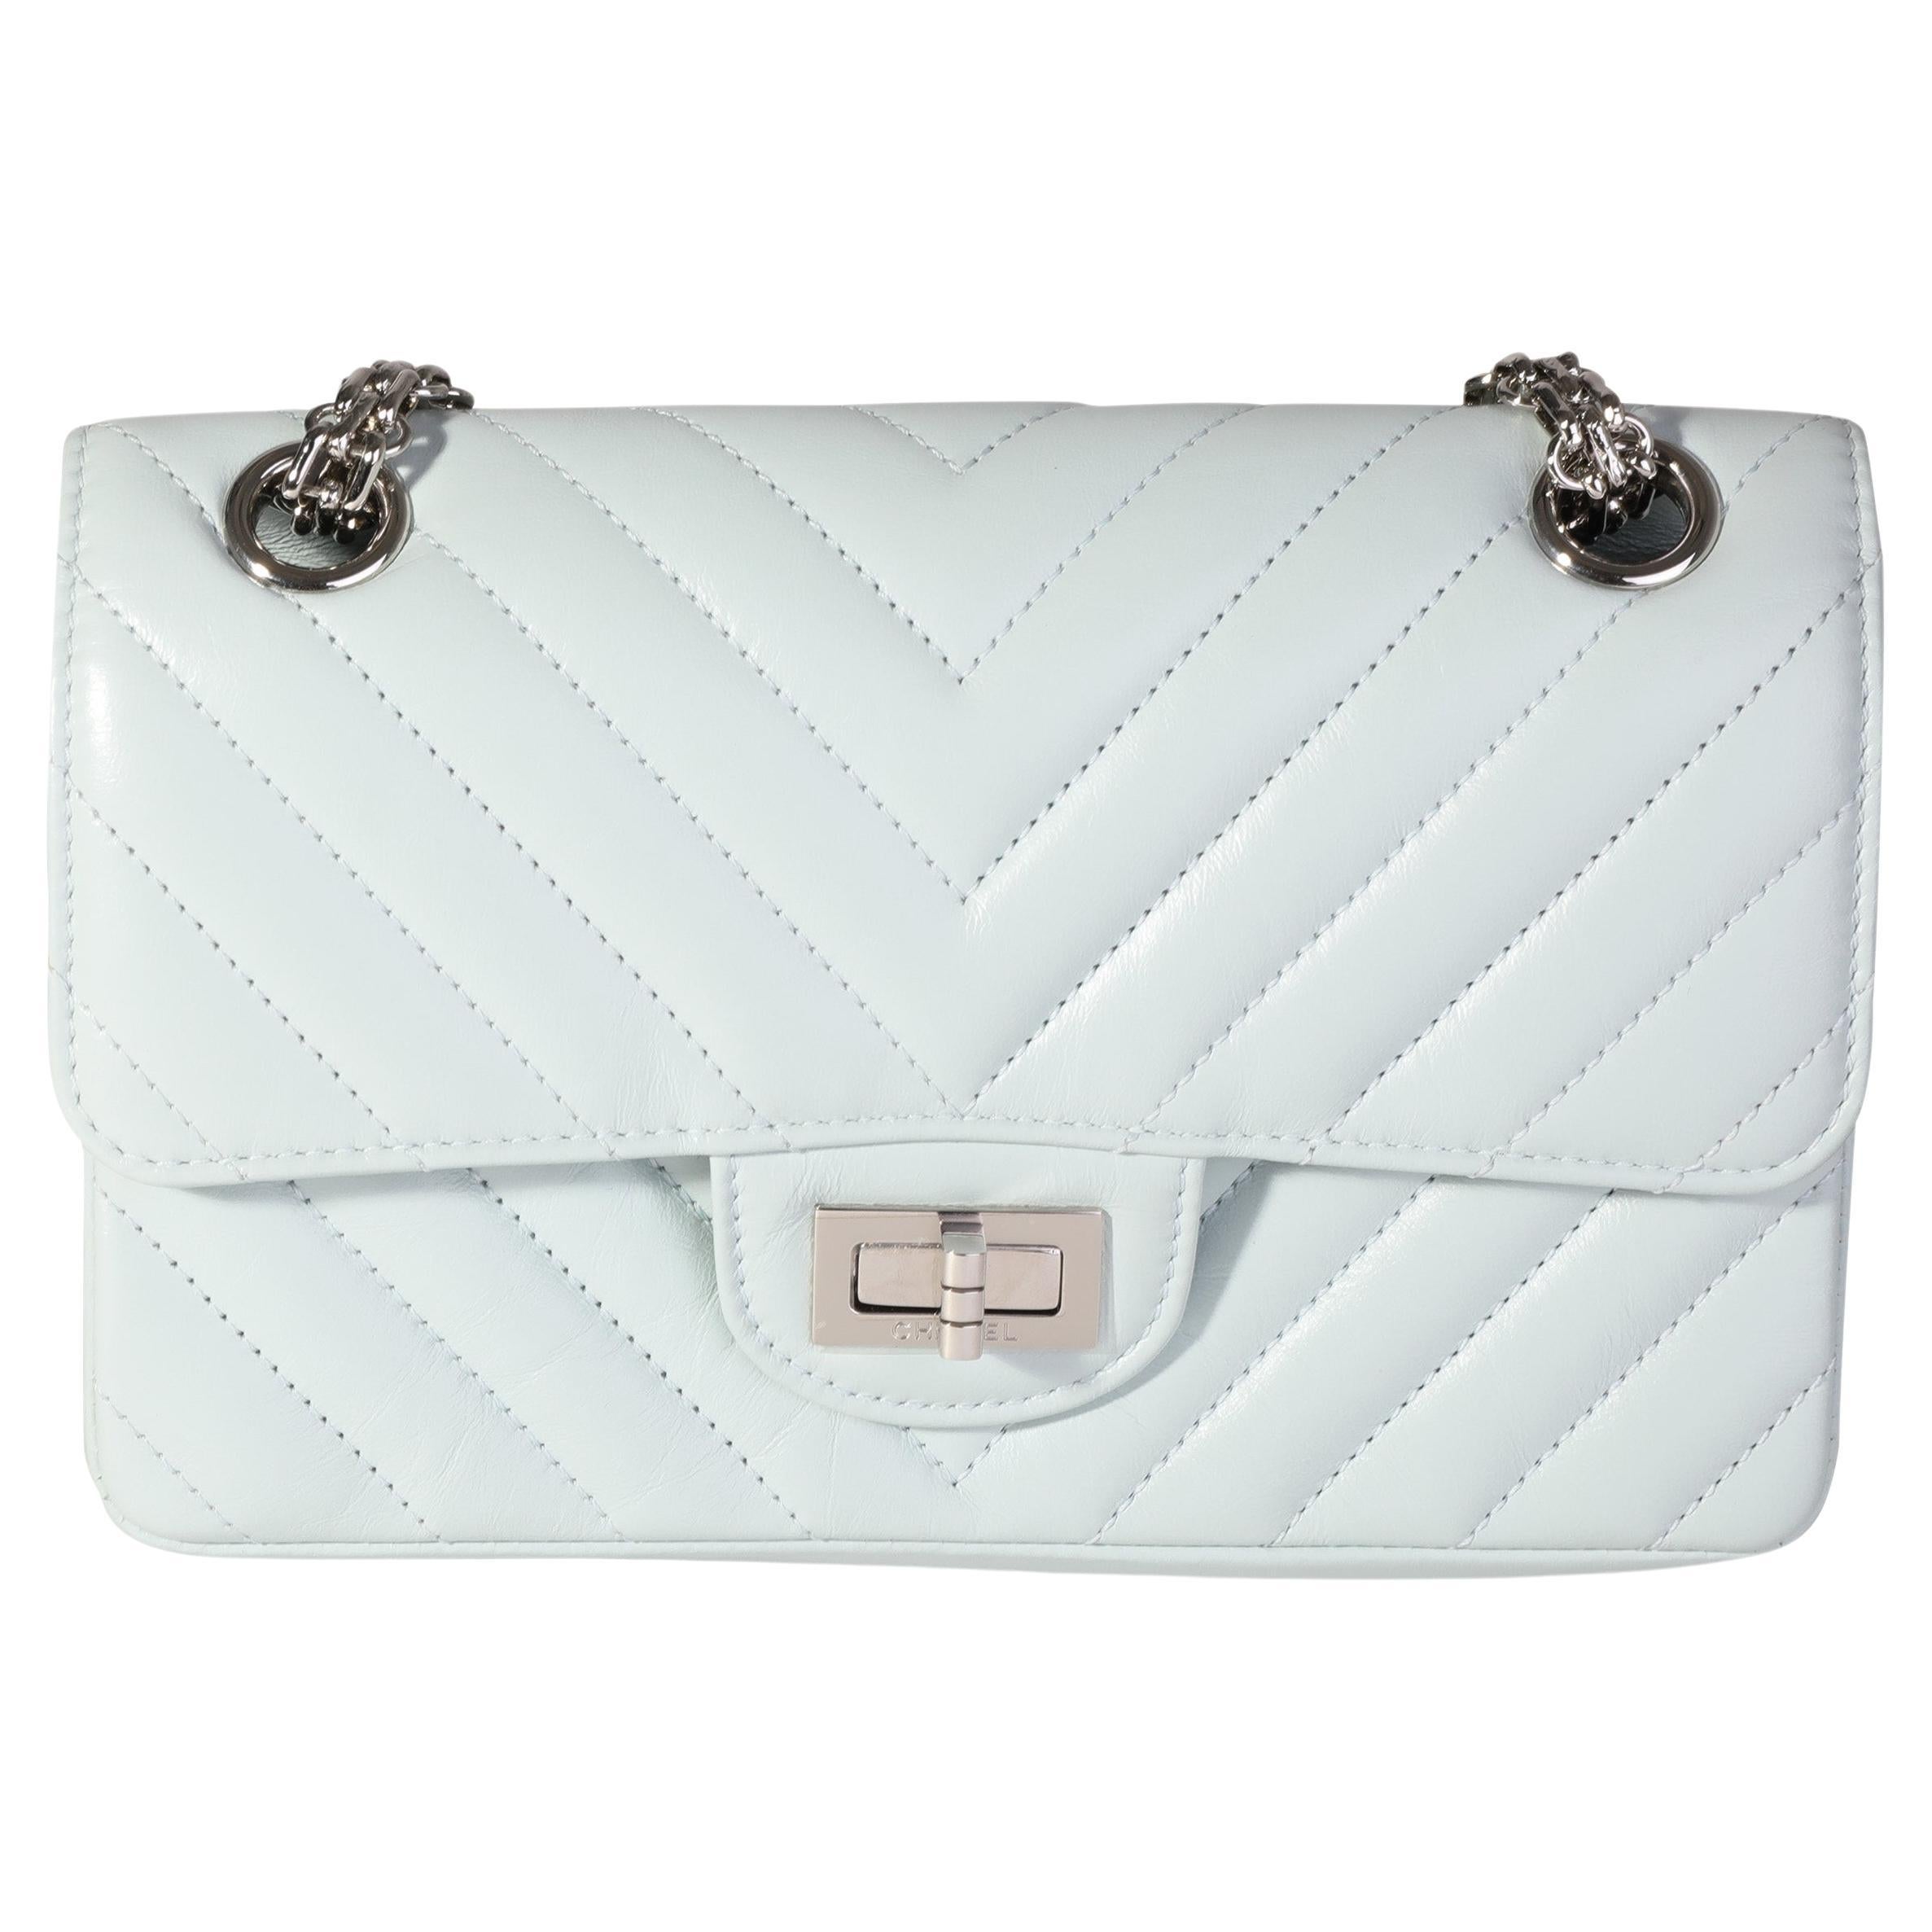 CHANEL, Bags, Chanel Light Blue Iridescent Quilted Calfskin Square Mini  Classic Flap Bag